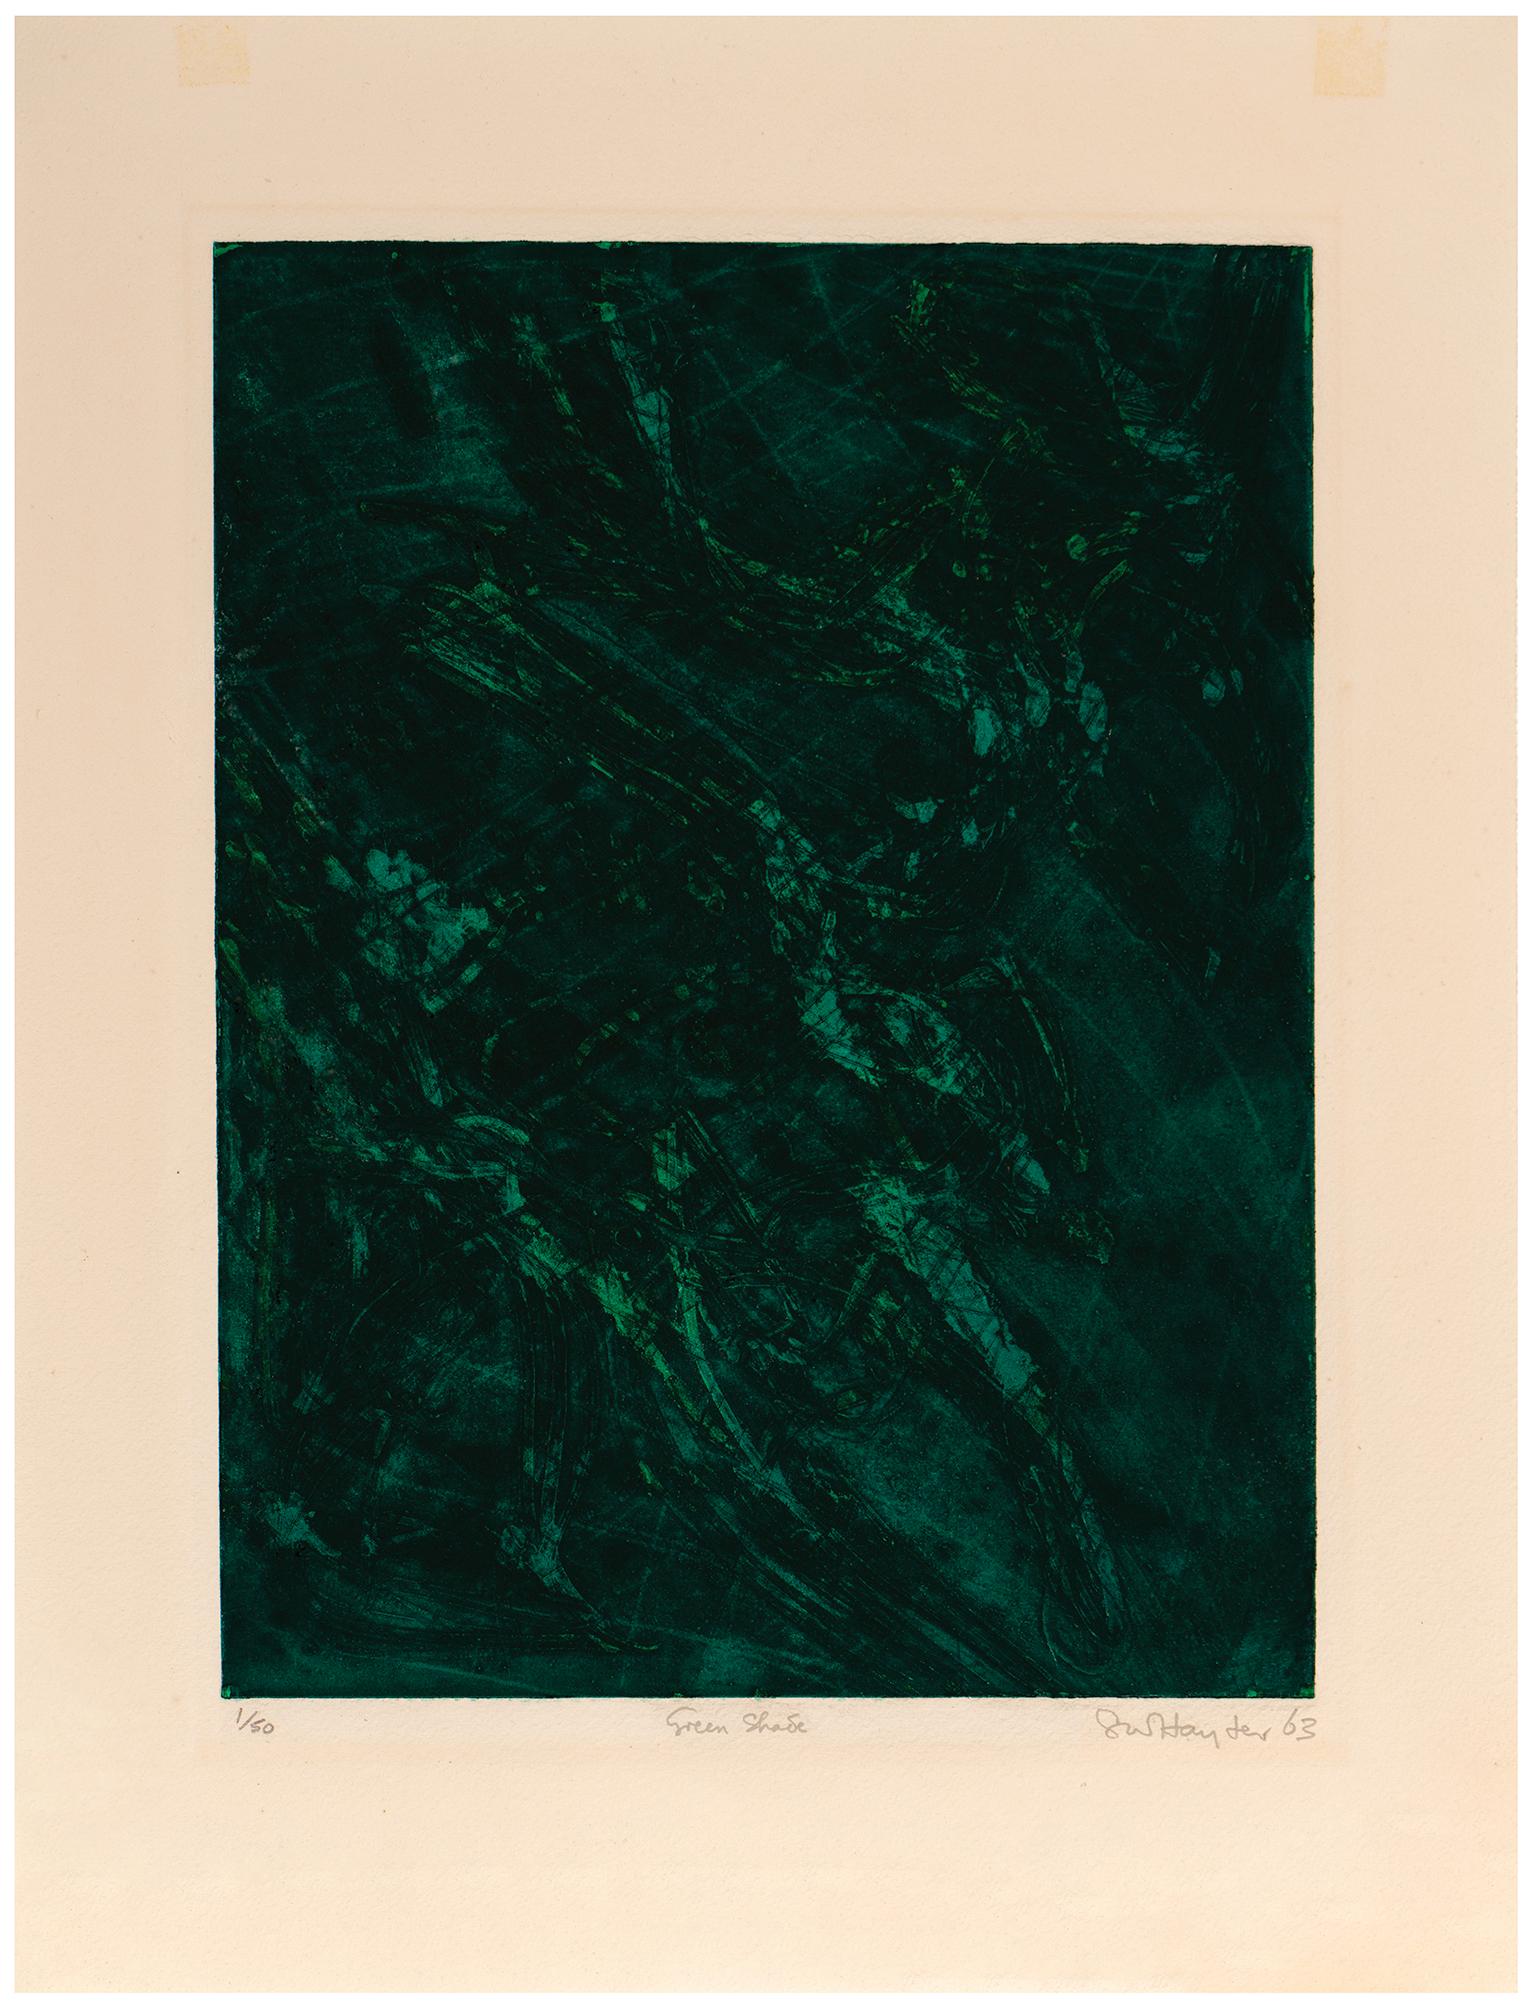 'Green Shade' — Mid-century Modernism, Abstract Expressionism, Atelier 17 - Print by Stanley William Hayter